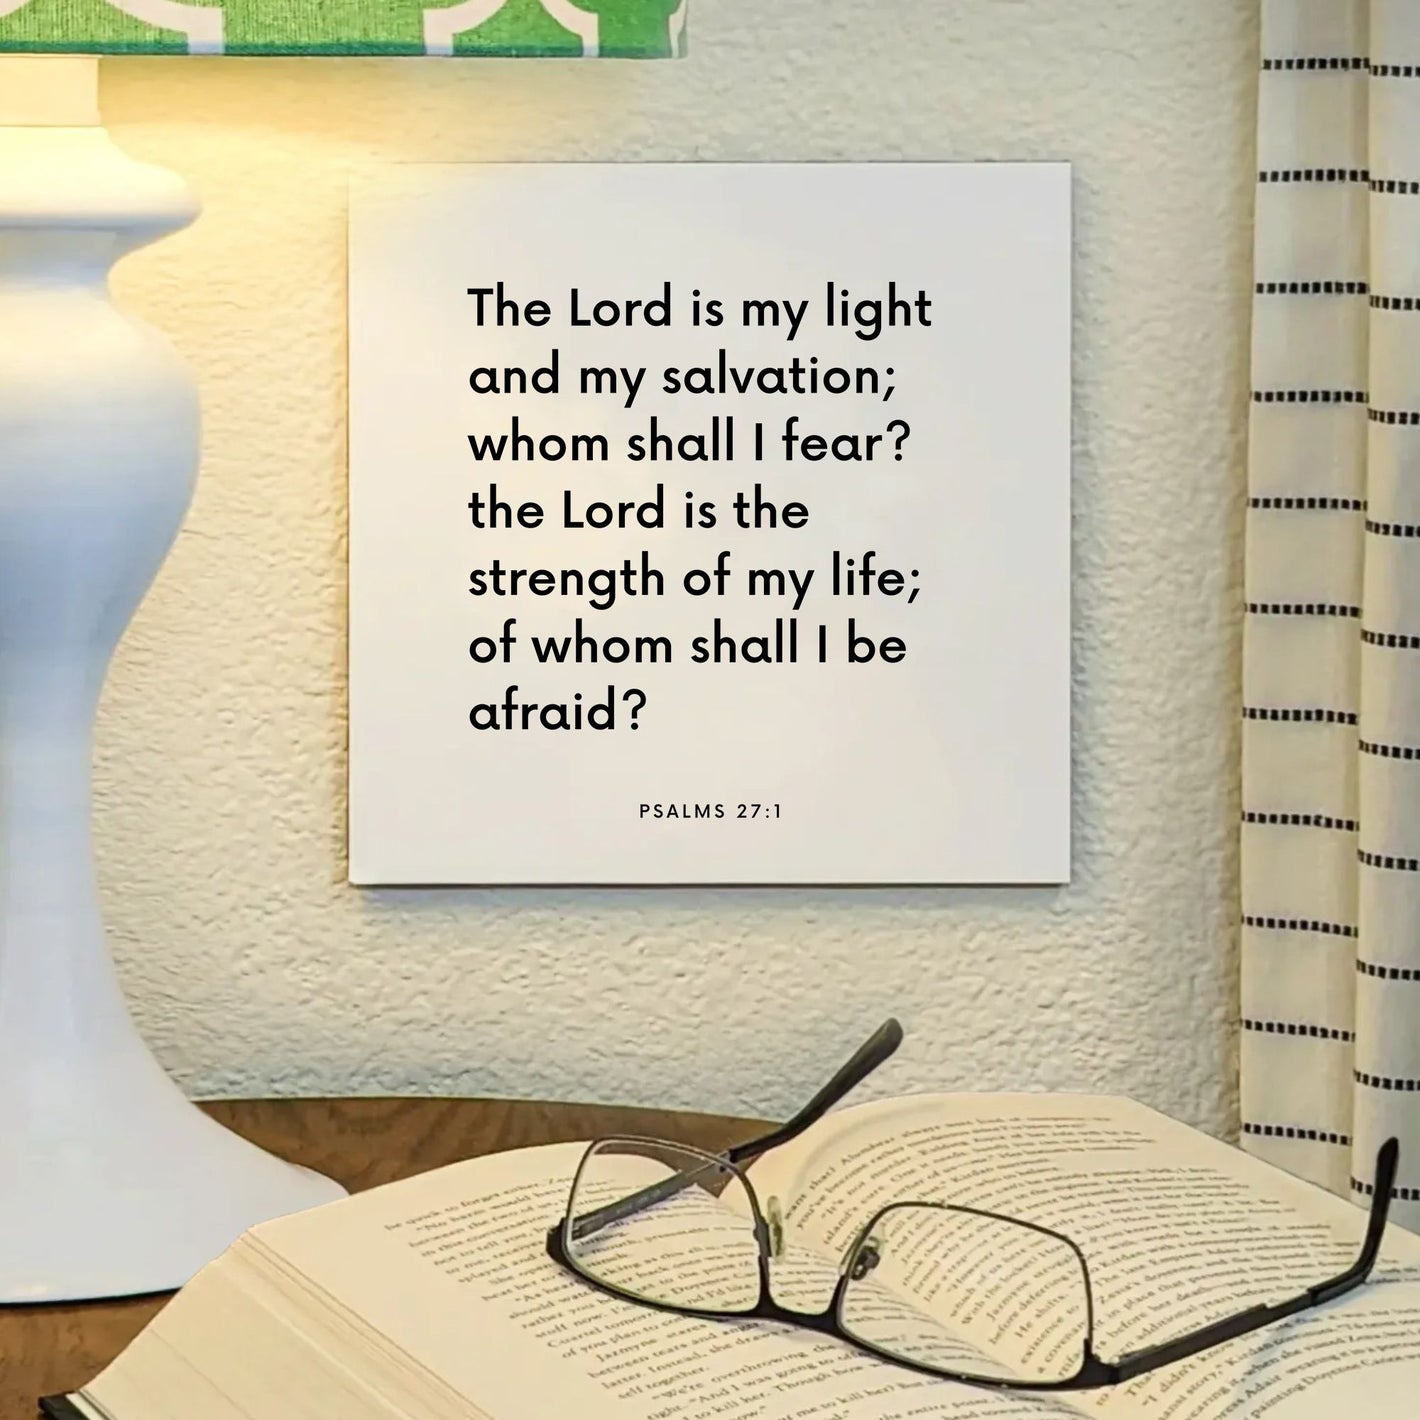 Lamp mouting of the scripture tile for Psalms 27:1 - "The Lord is my light and my salvation; whom shall I fear?"